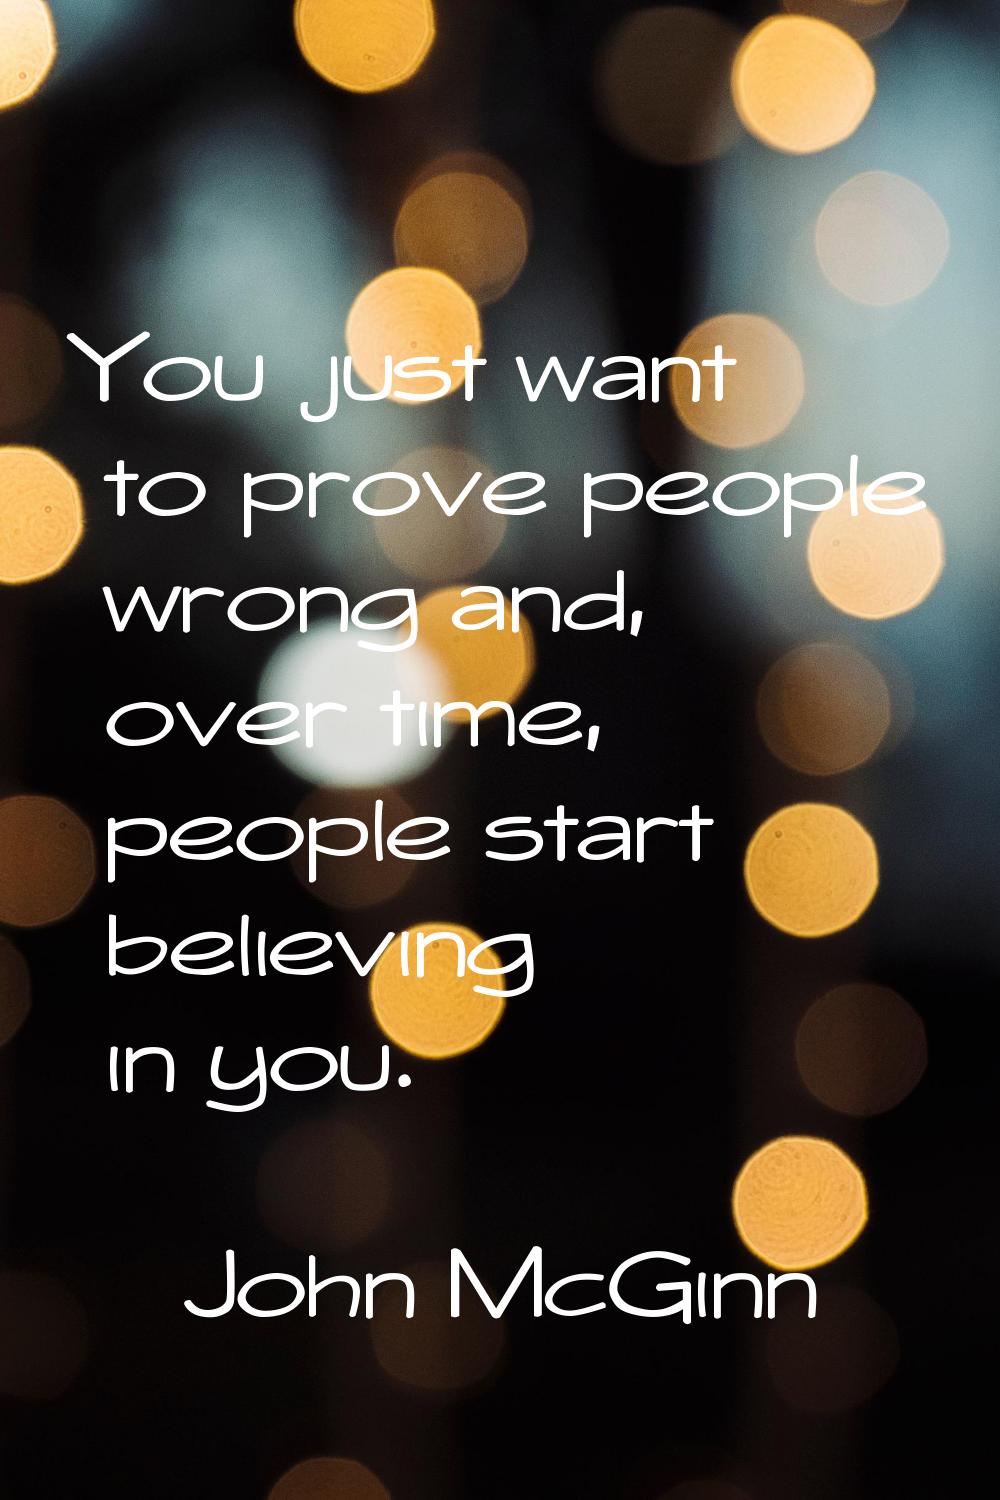 You just want to prove people wrong and, over time, people start believing in you.